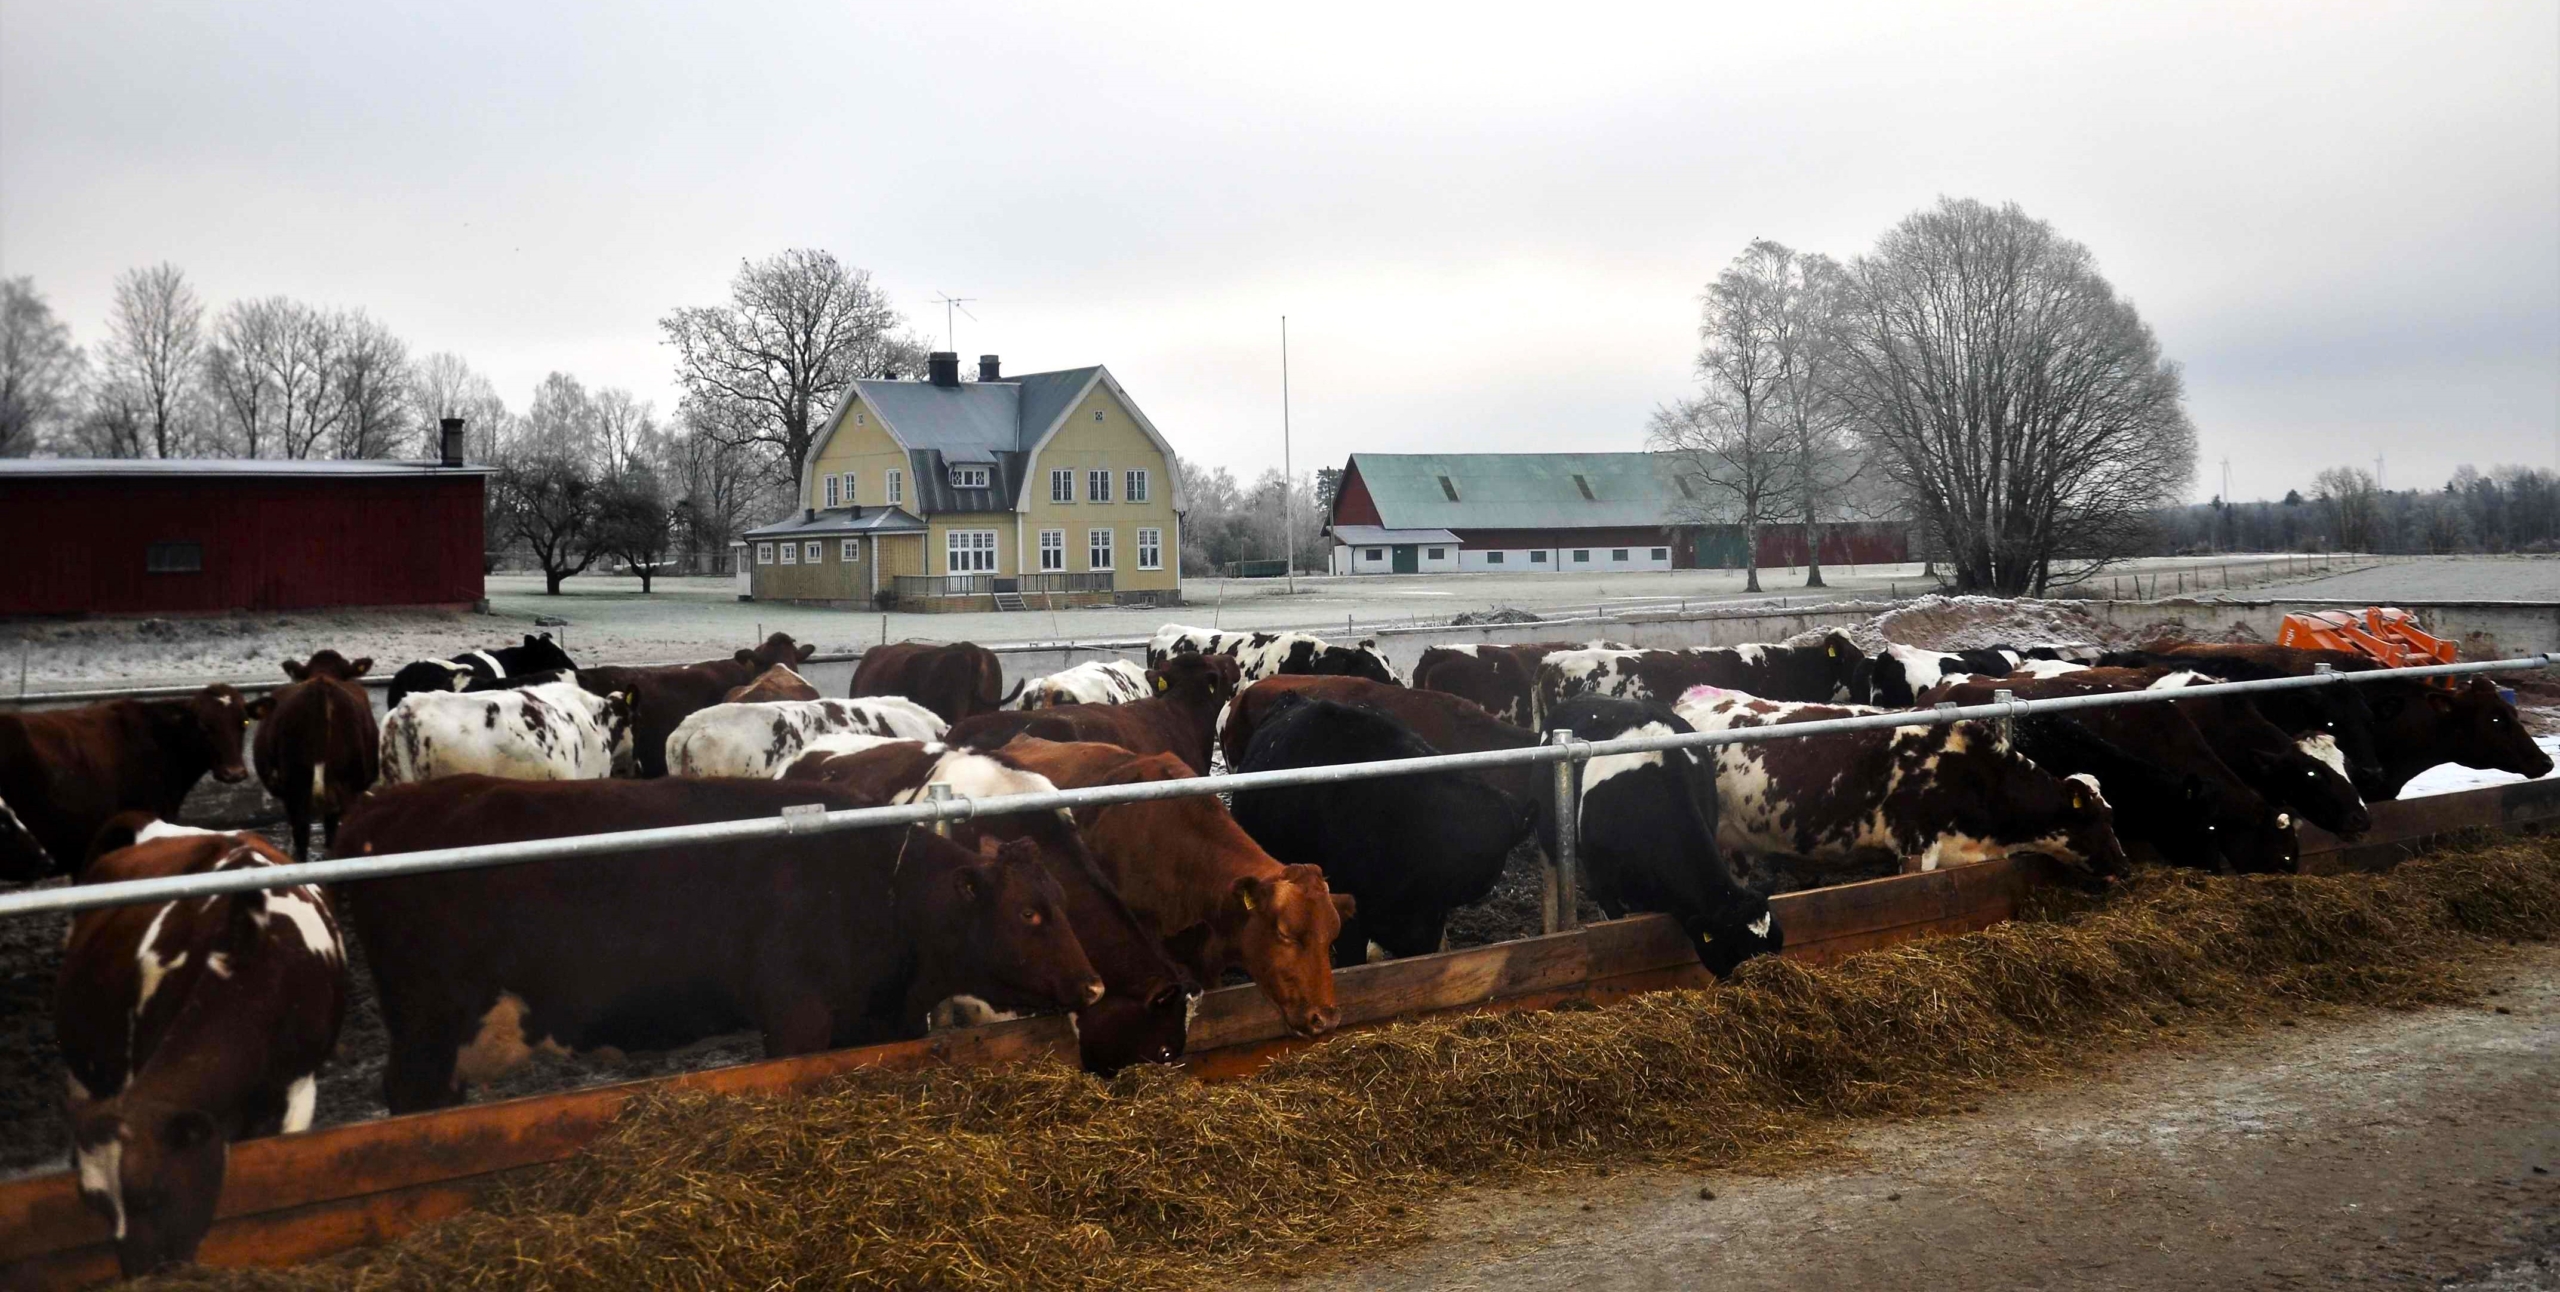 On Västerängs farm, the dairy cows have summer time all year round....